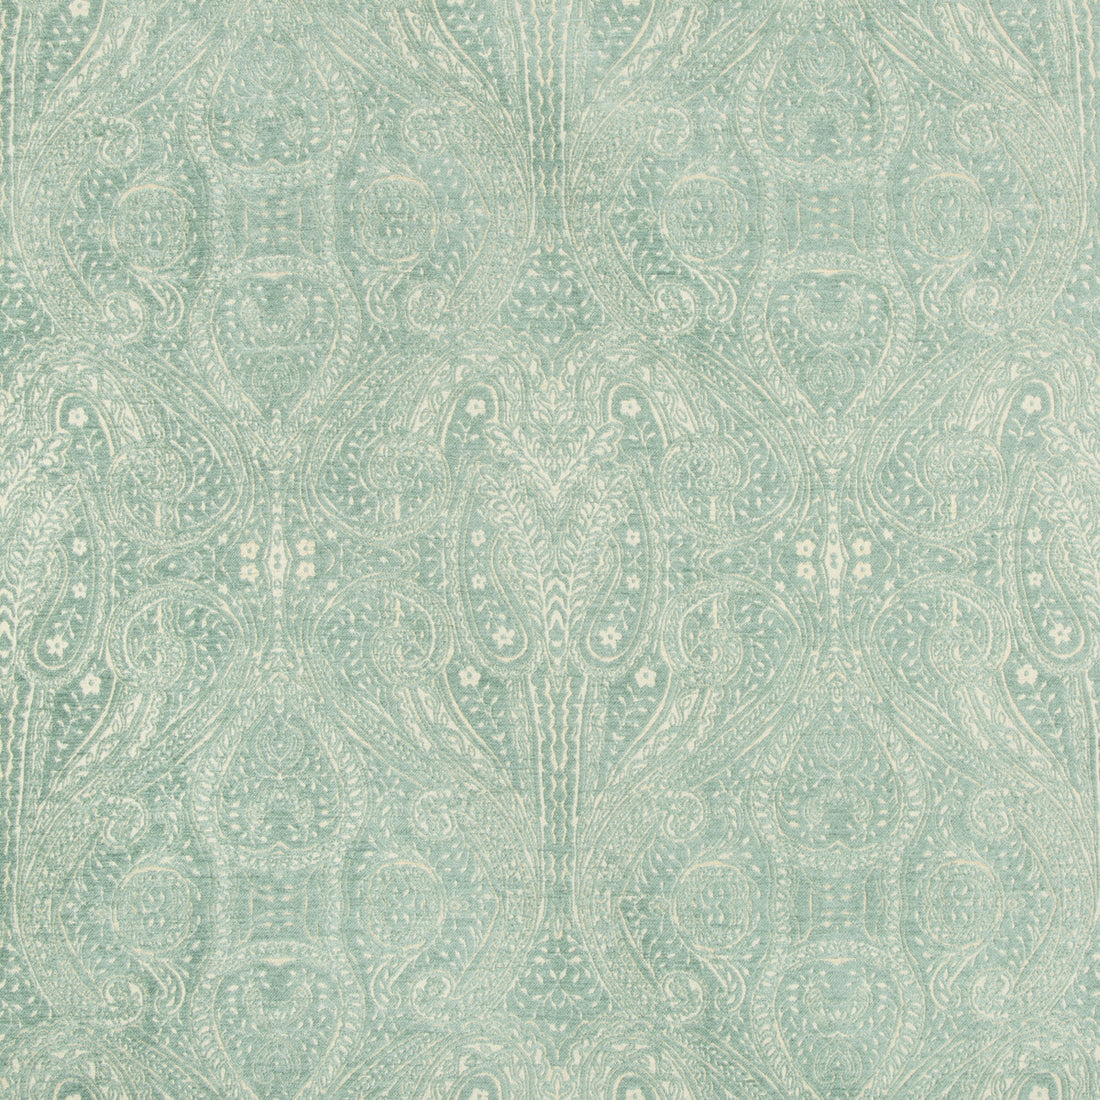 Kravet Contract fabric in 34767-113 color - pattern 34767.113.0 - by Kravet Contract in the Gis collection